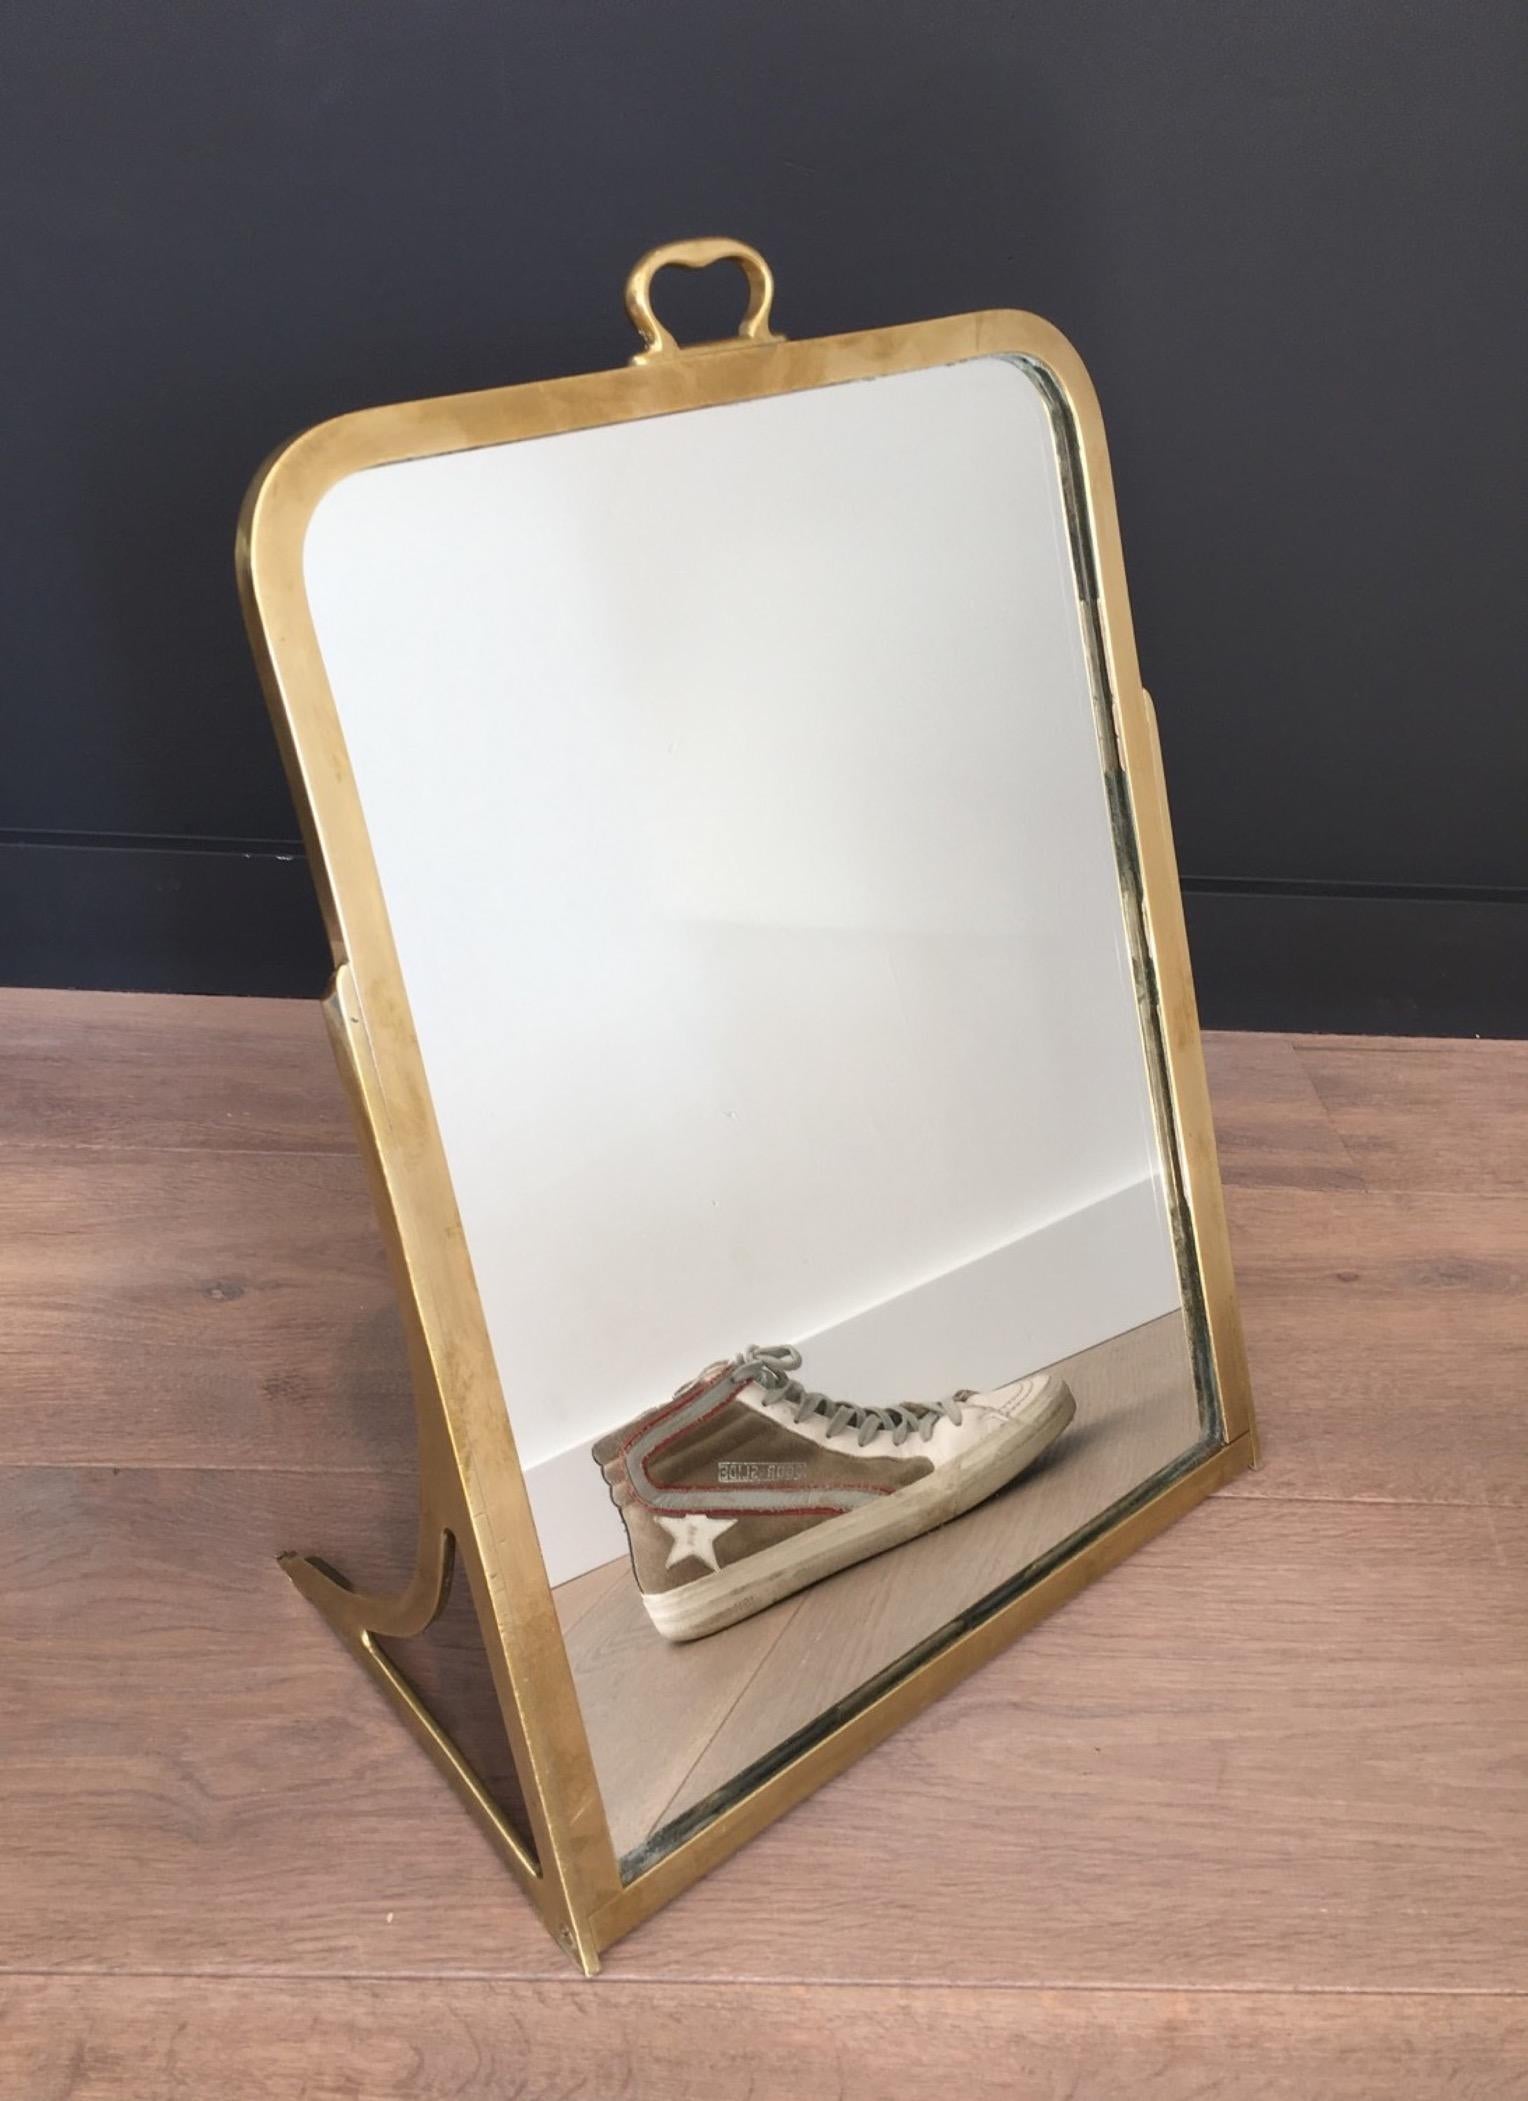 This dressing shoe mirror is made of brass. This is a rare piece, made in France, circa 1900.